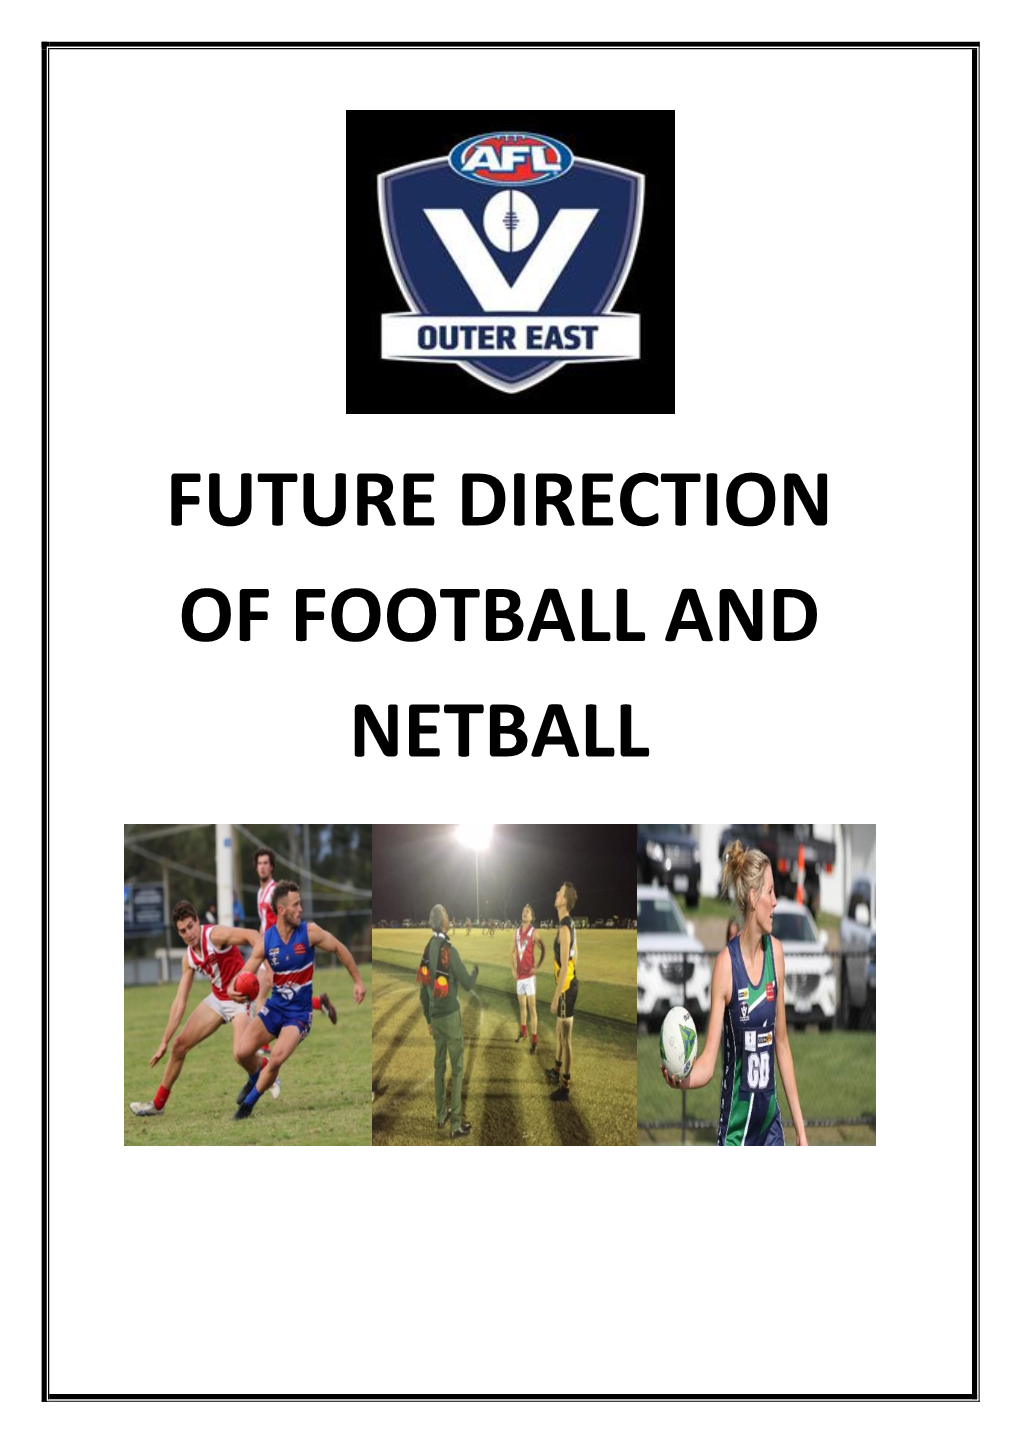 Future Direction of Football and Netball